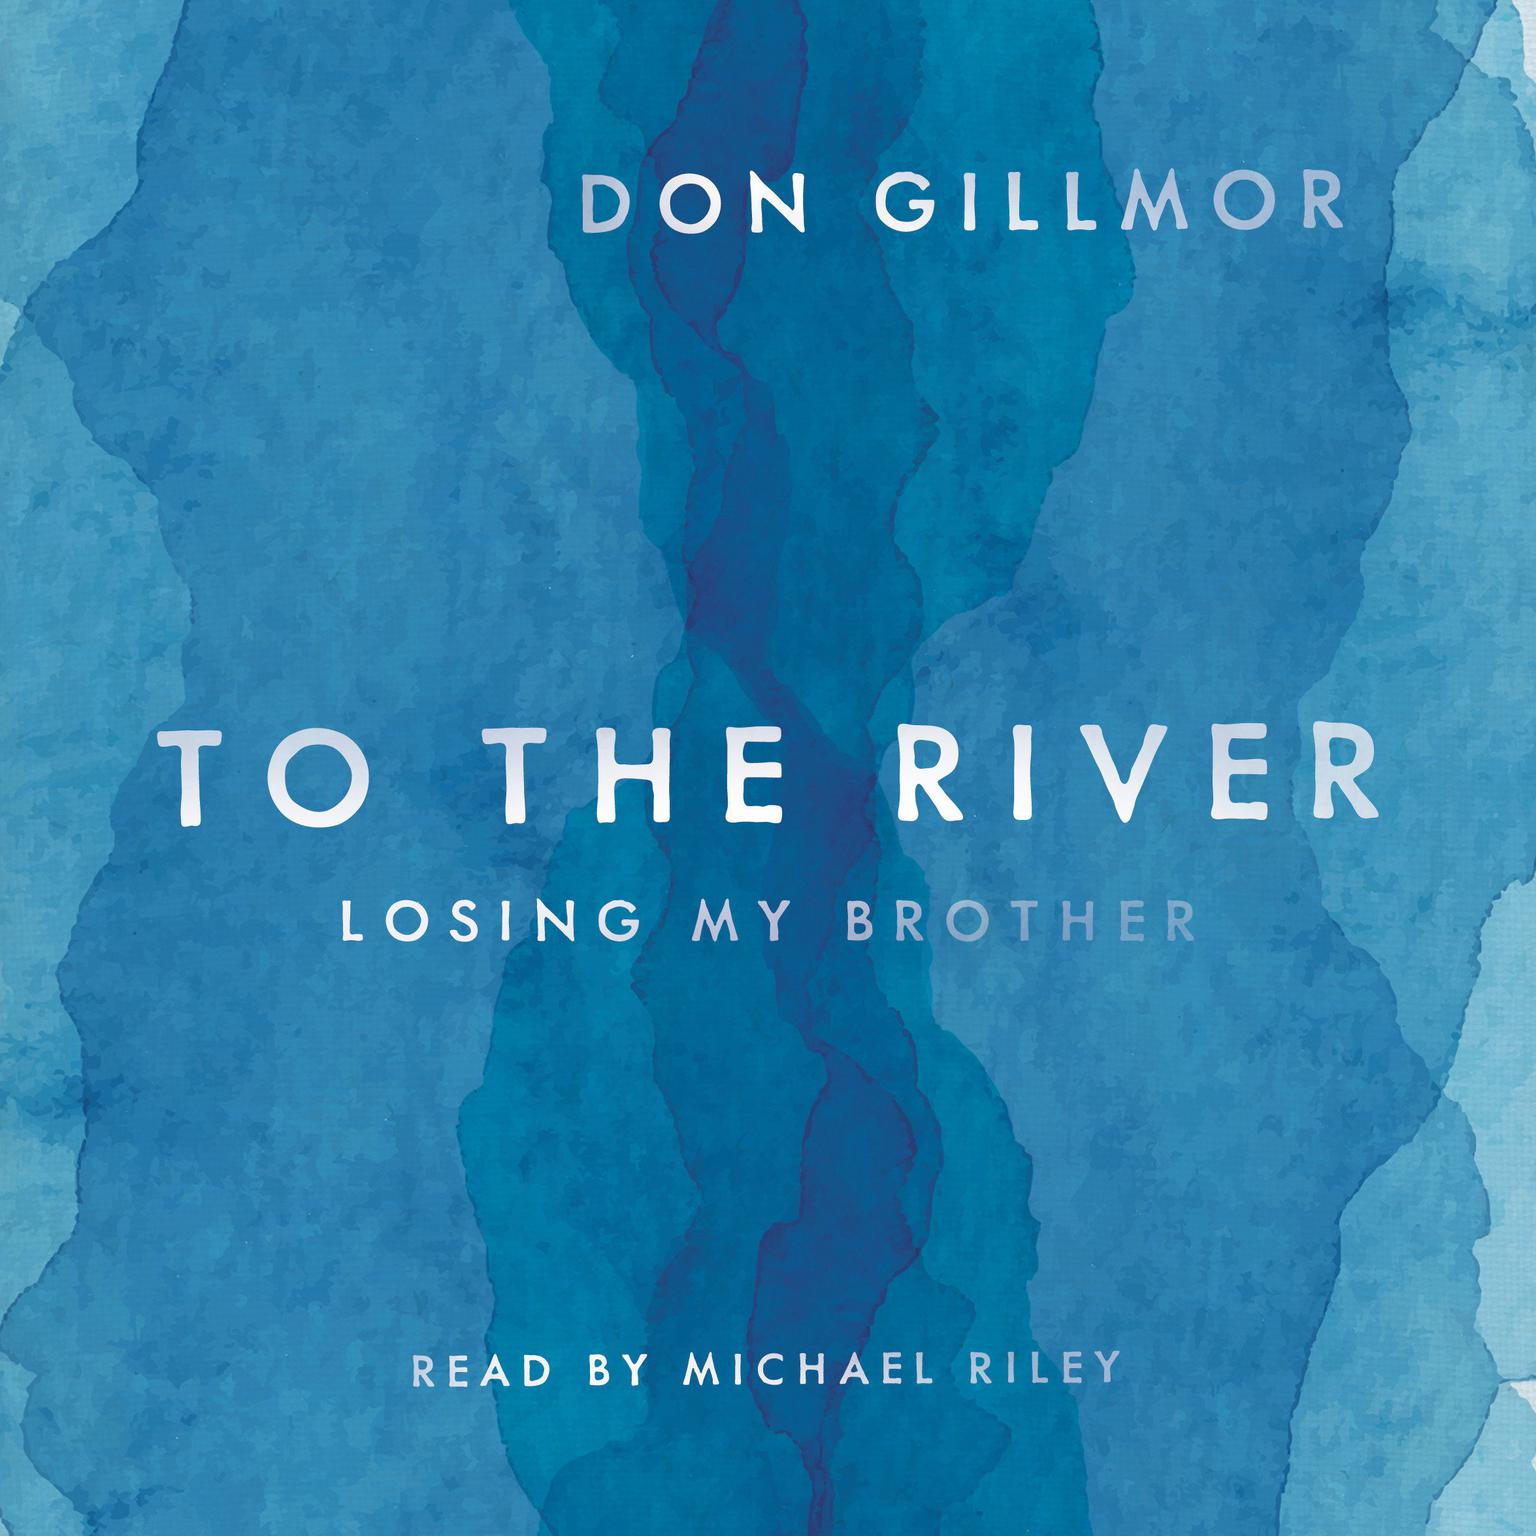 To the River: Losing My Brother Audiobook, by Don Gillmor